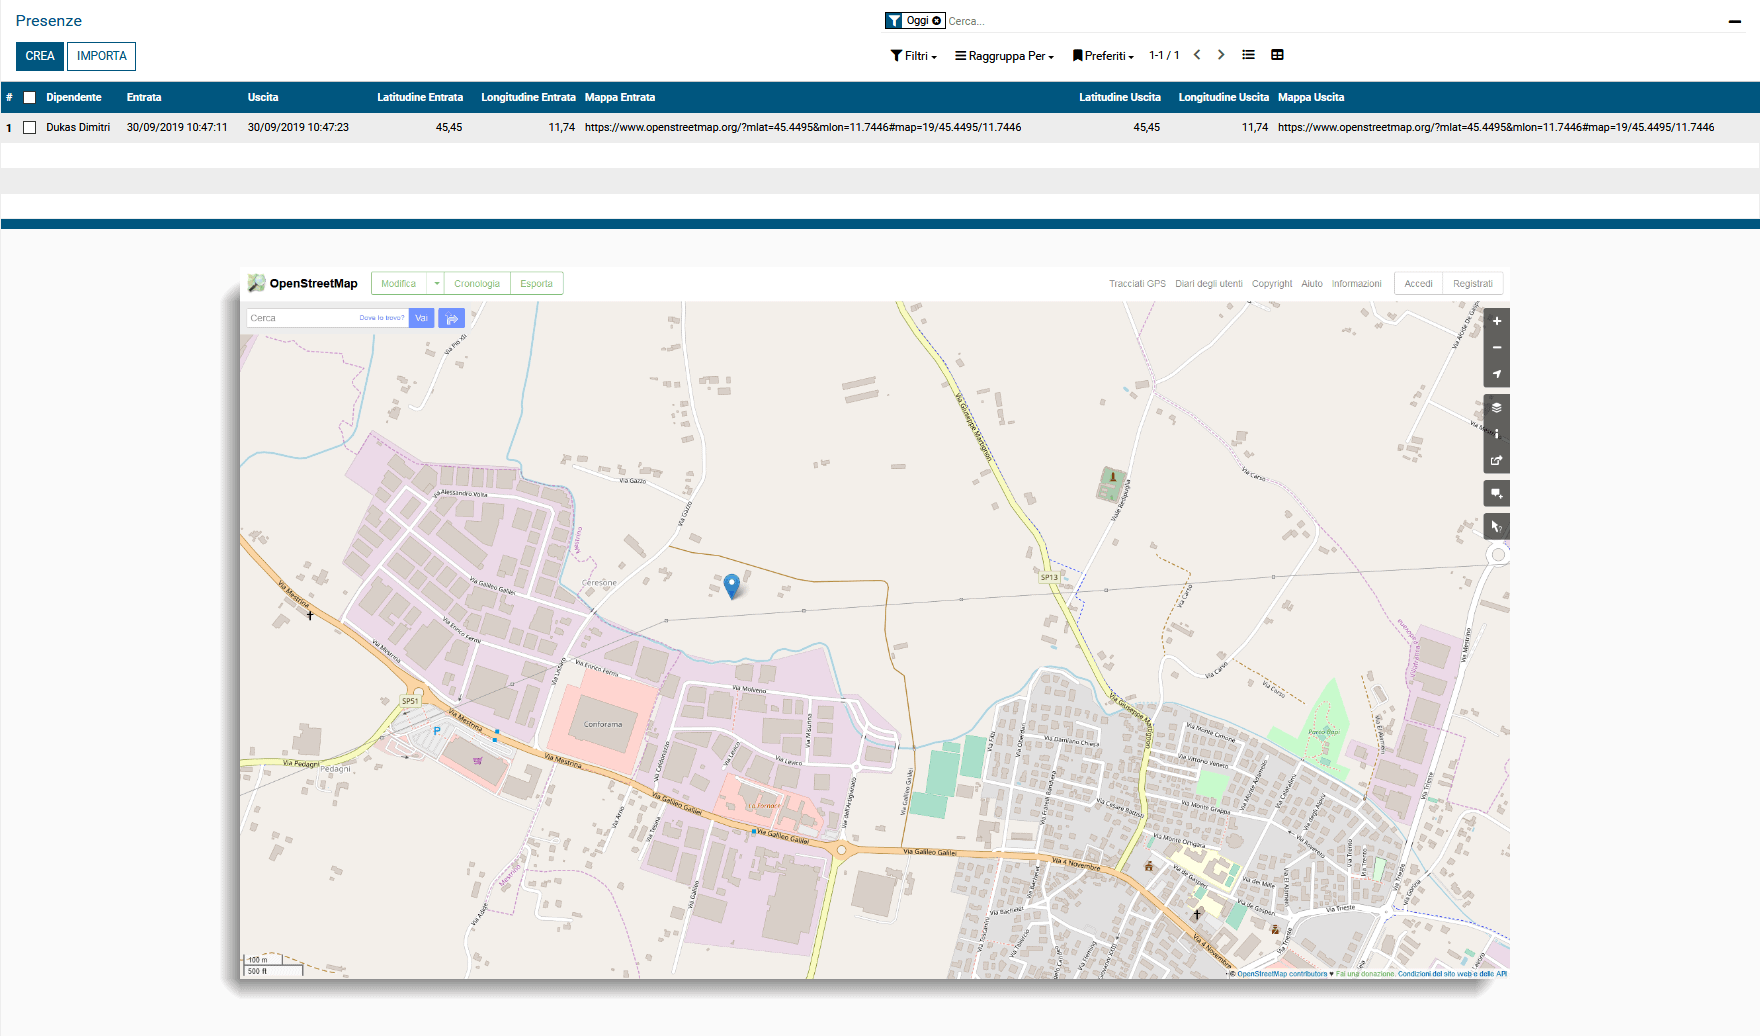 Geolocation of the user